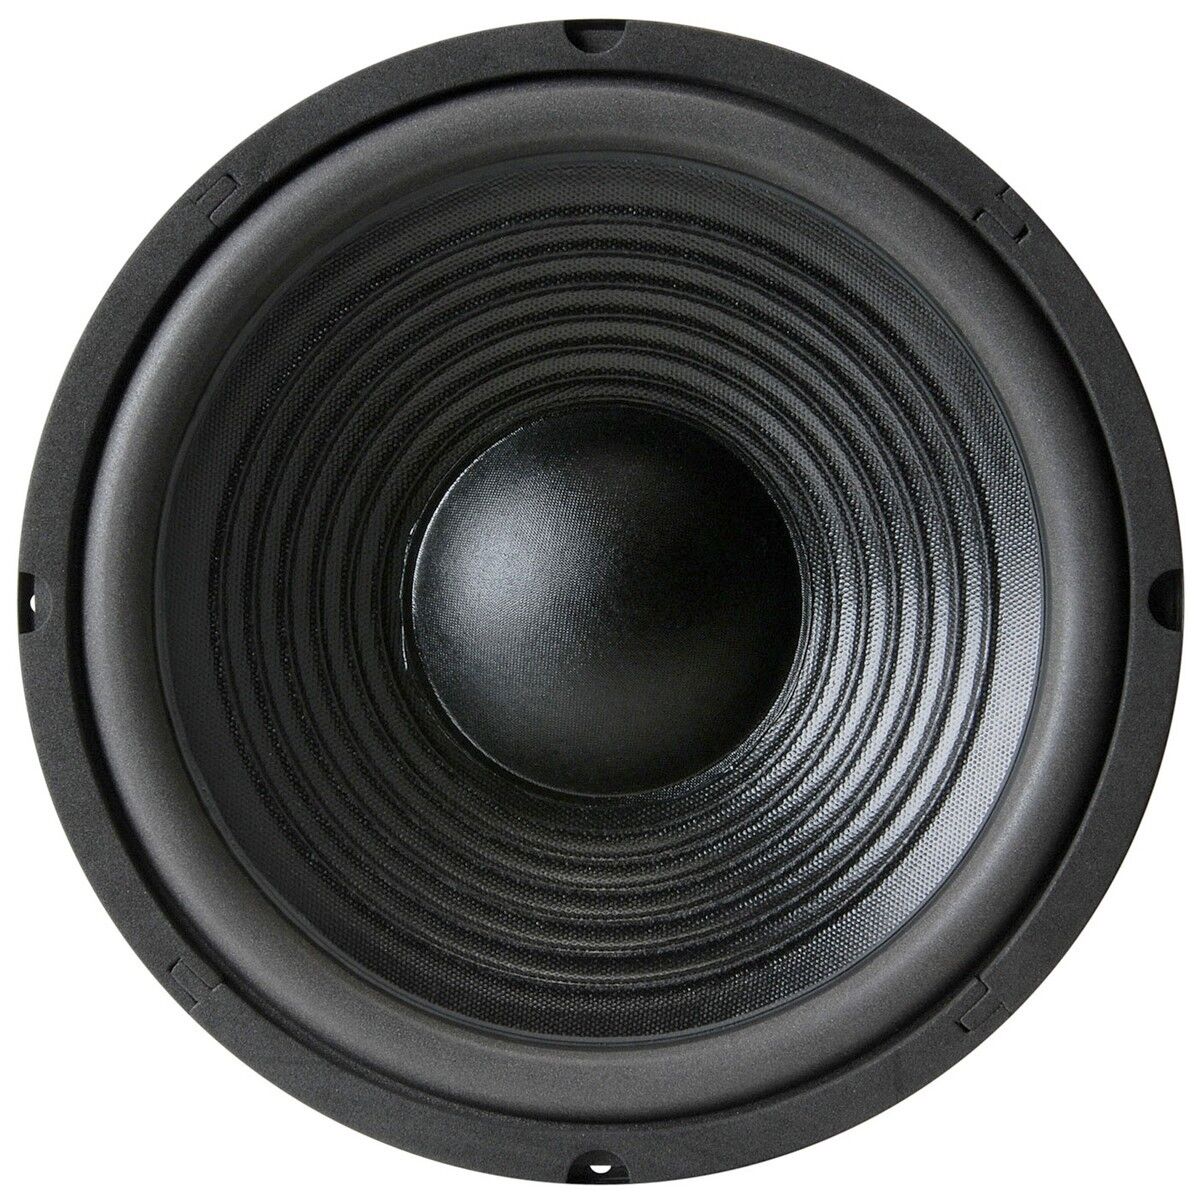 10" Woofer Speaker.Home Audio 8ohm bass replacement eBay